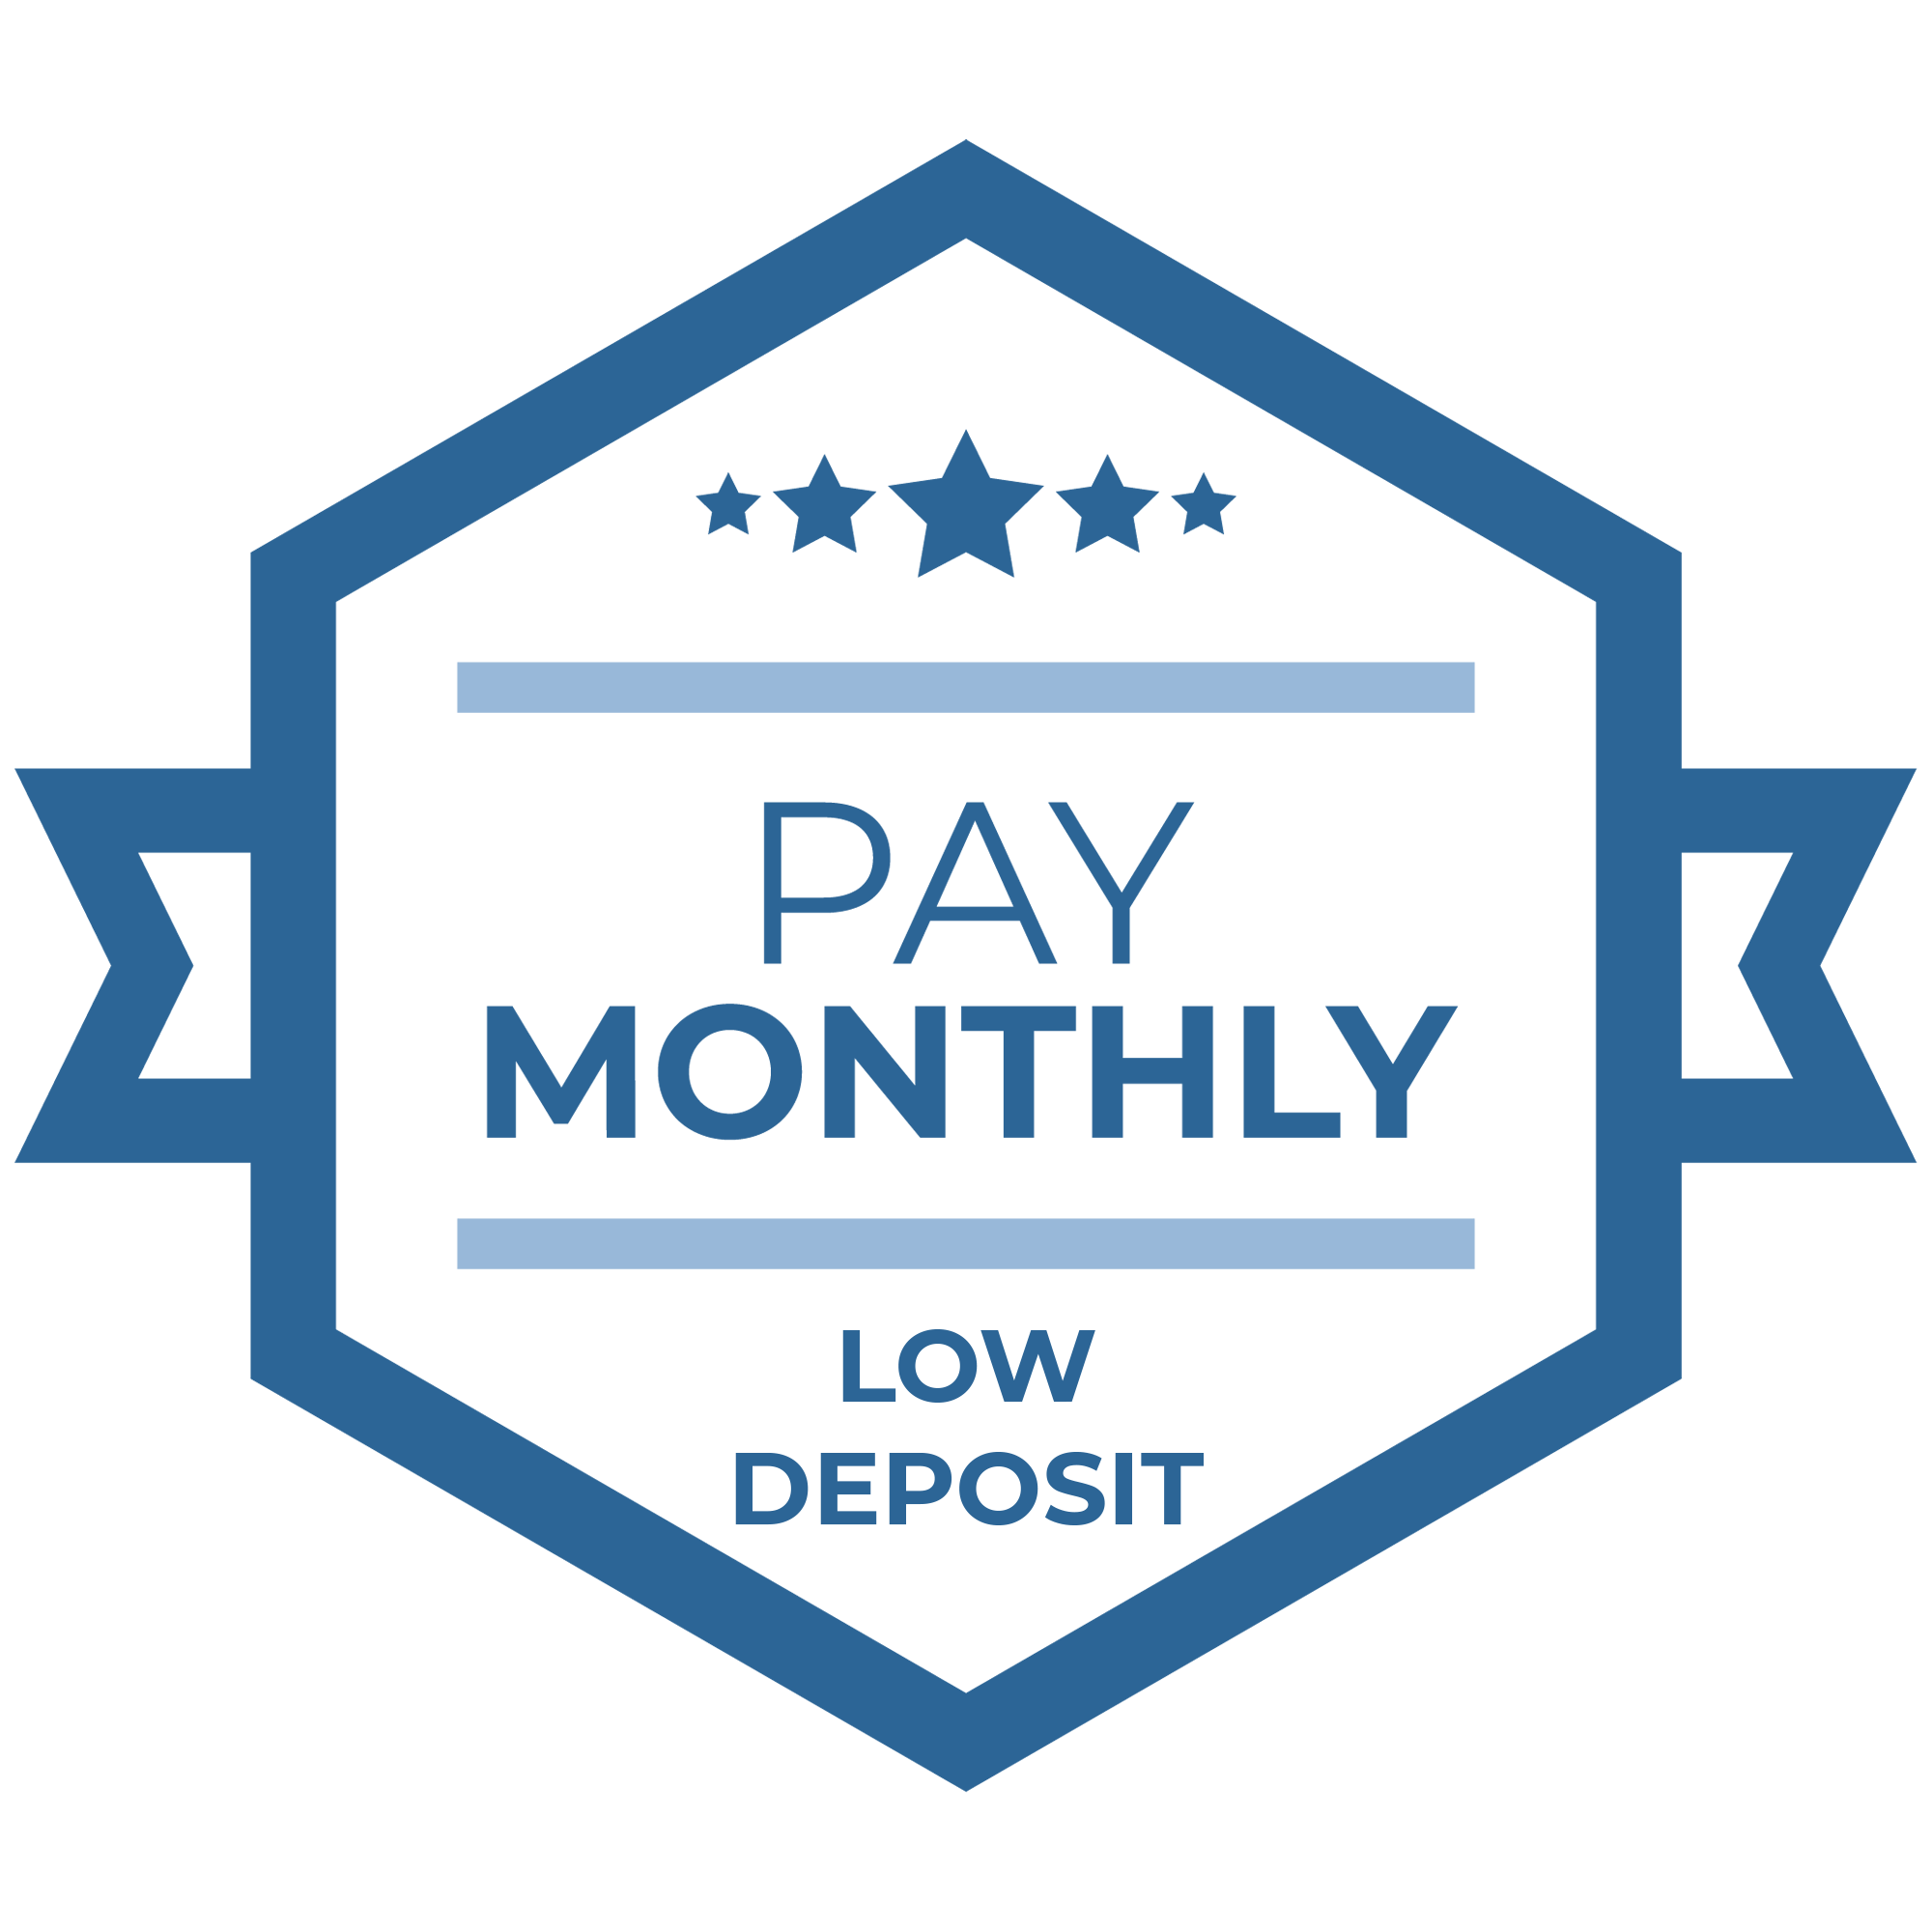 Pay Monthly with Low Deposit